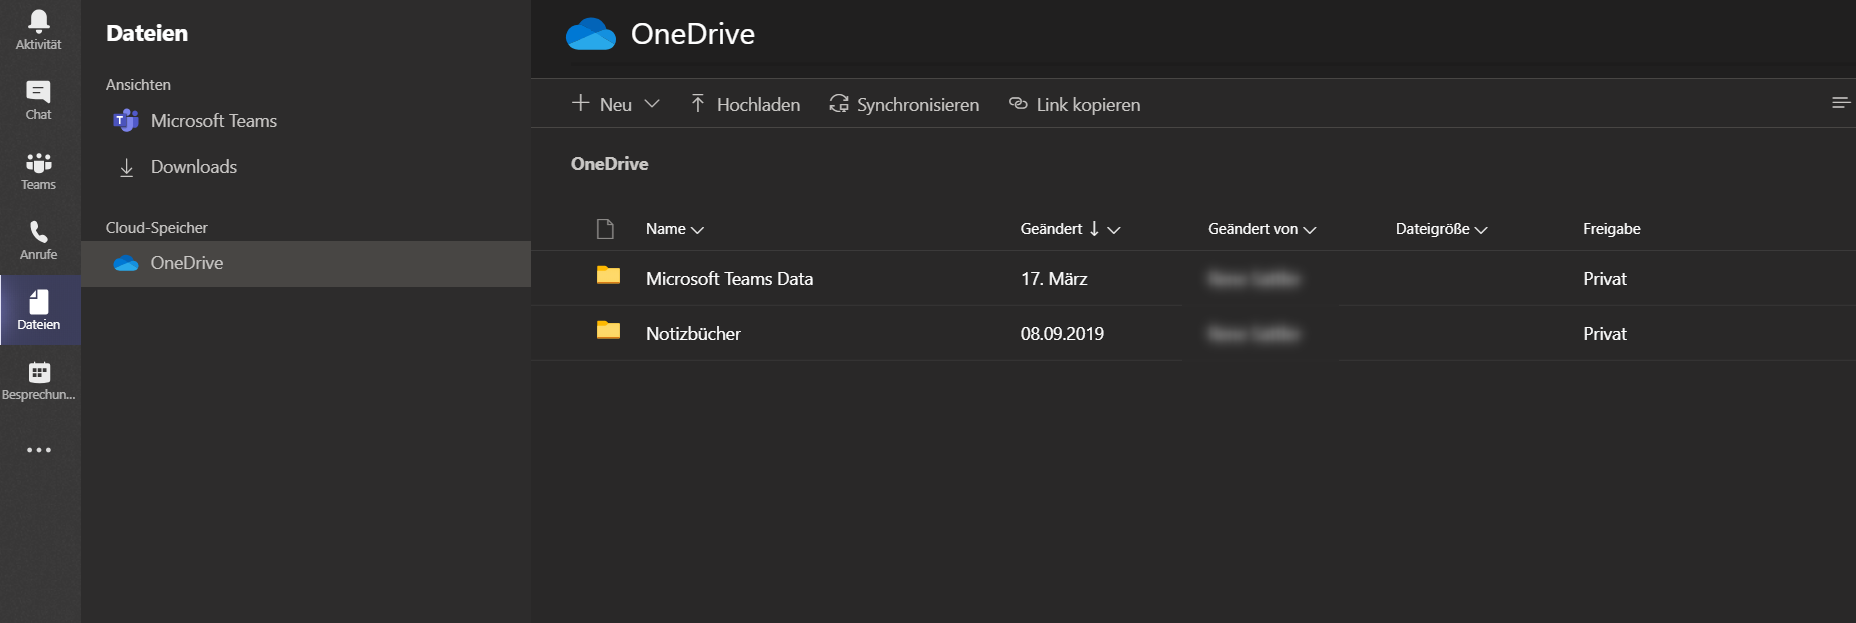 Zugriff auf OneDrive Daten in der Personal Teams version a7f7d728-9eac-49f8-b0d2-29f0775a5466?upload=true.png